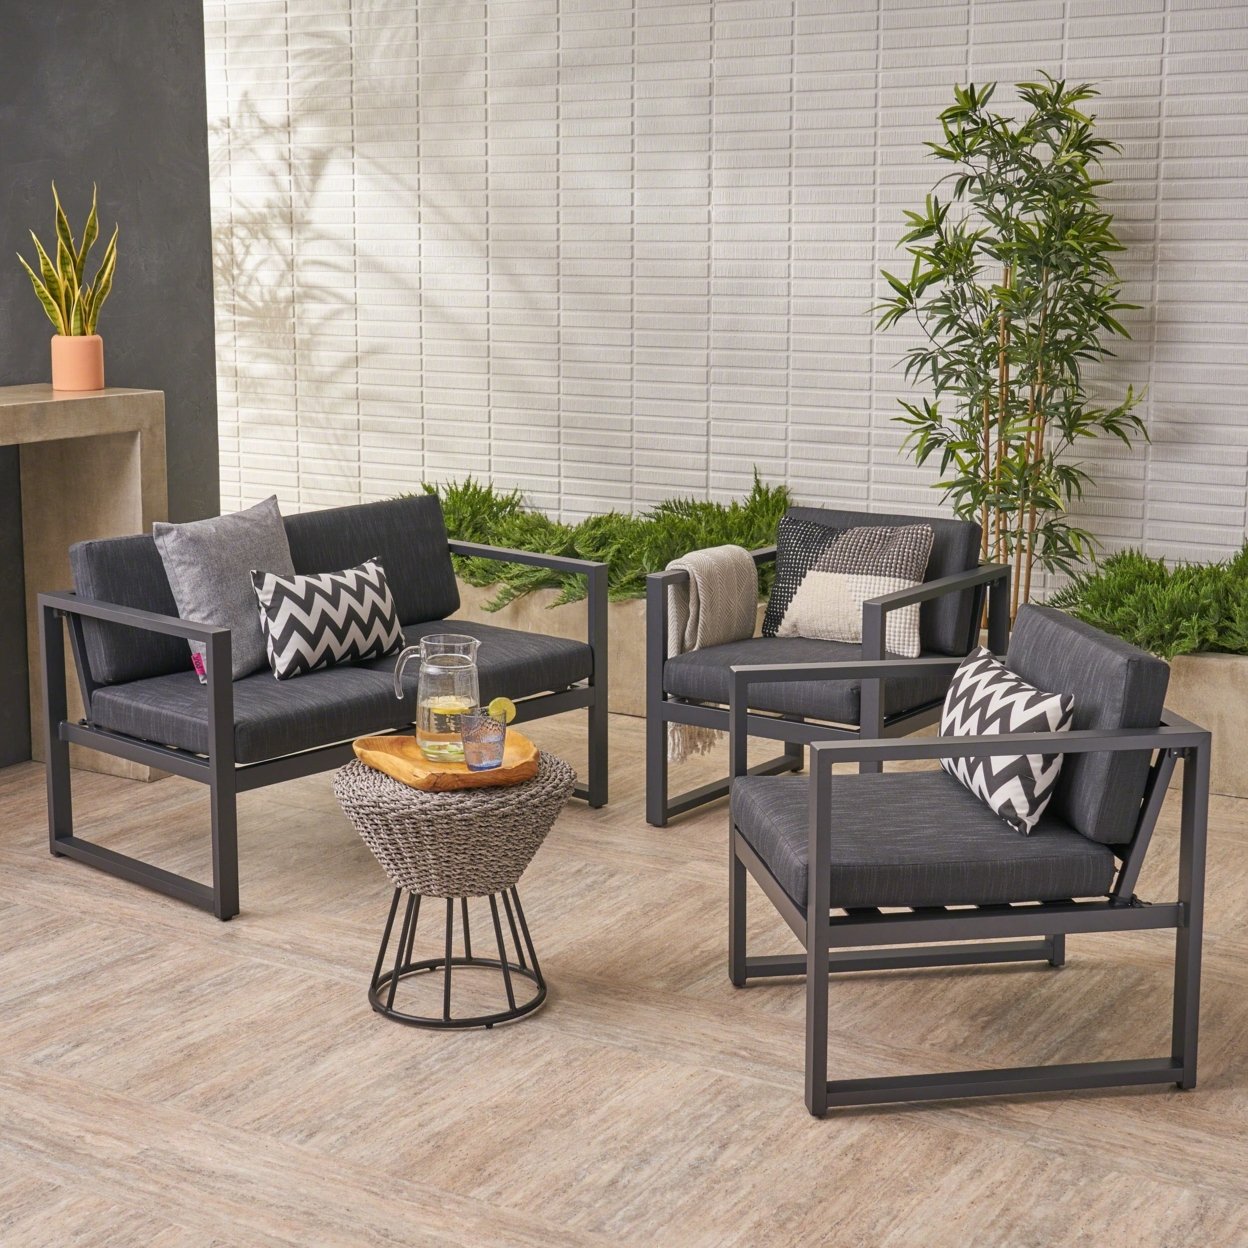 Navan Outdoor 4 Seater Aluminum Chat Set, Silver With Dark Grey Cushions